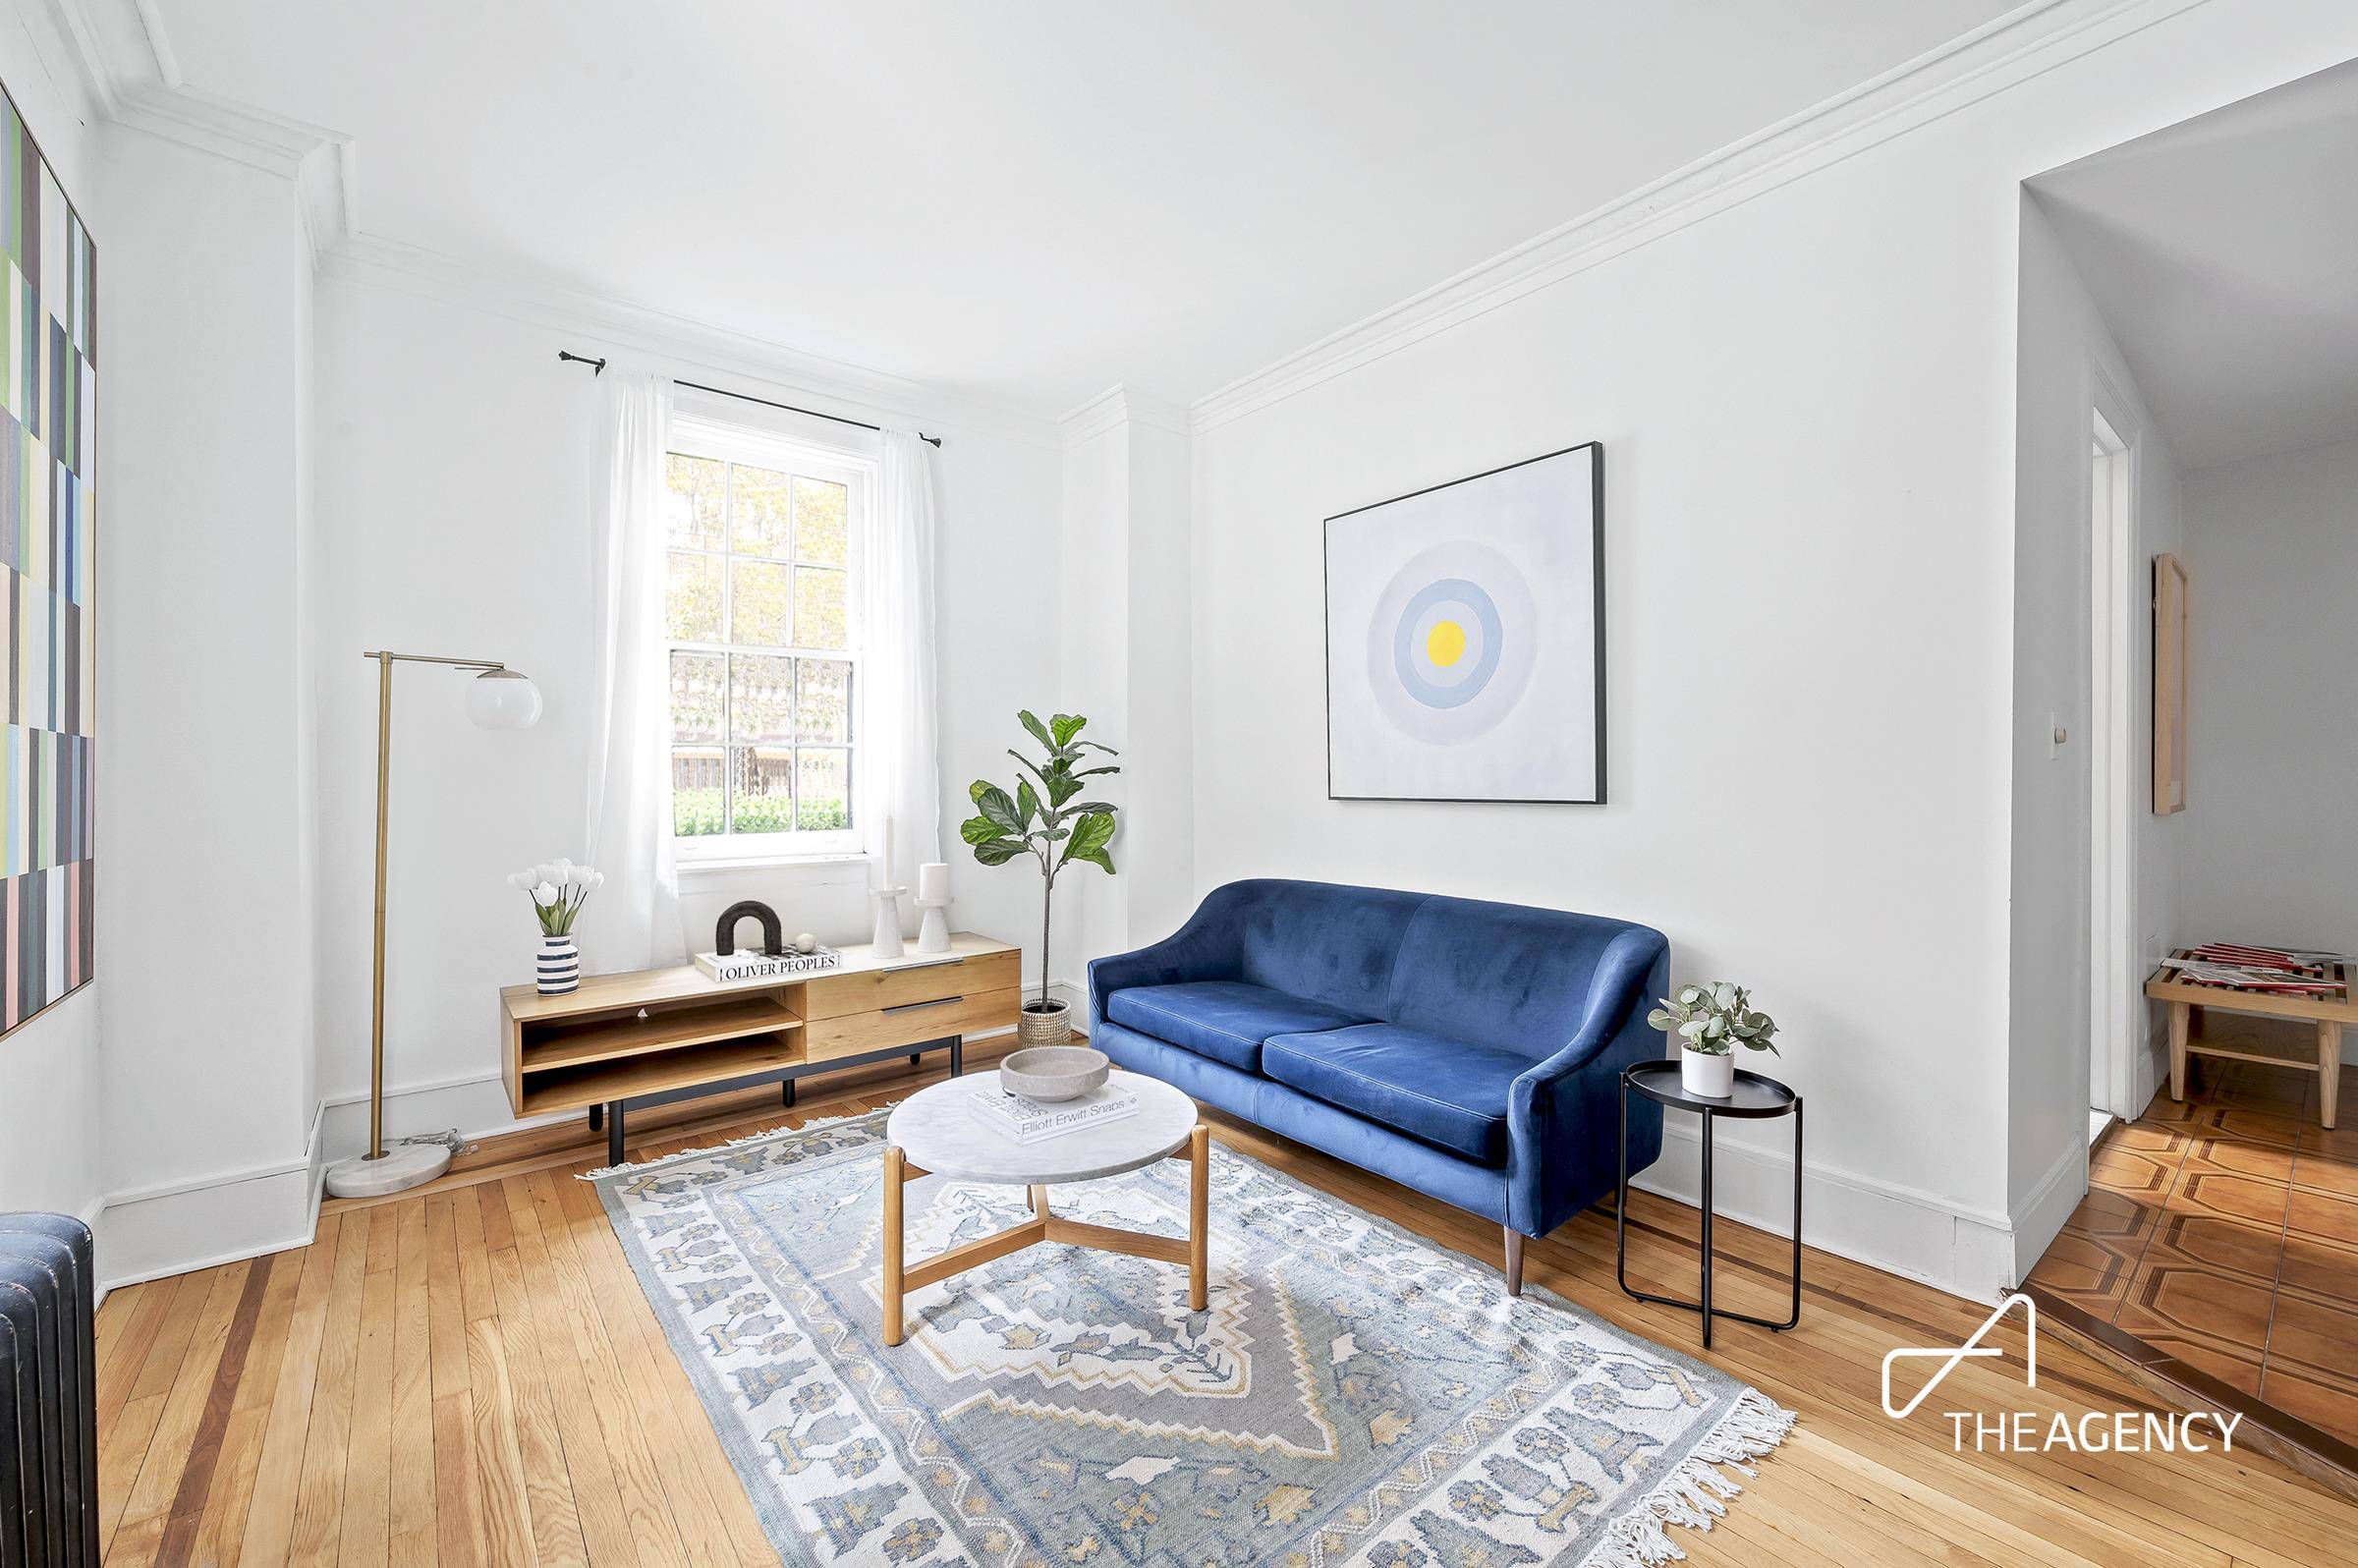 The classic prewar one bedroom home located in the Helme amp ; Corbett building at the corner of East 9th St and University in Greenwich Village offers a charming and ...